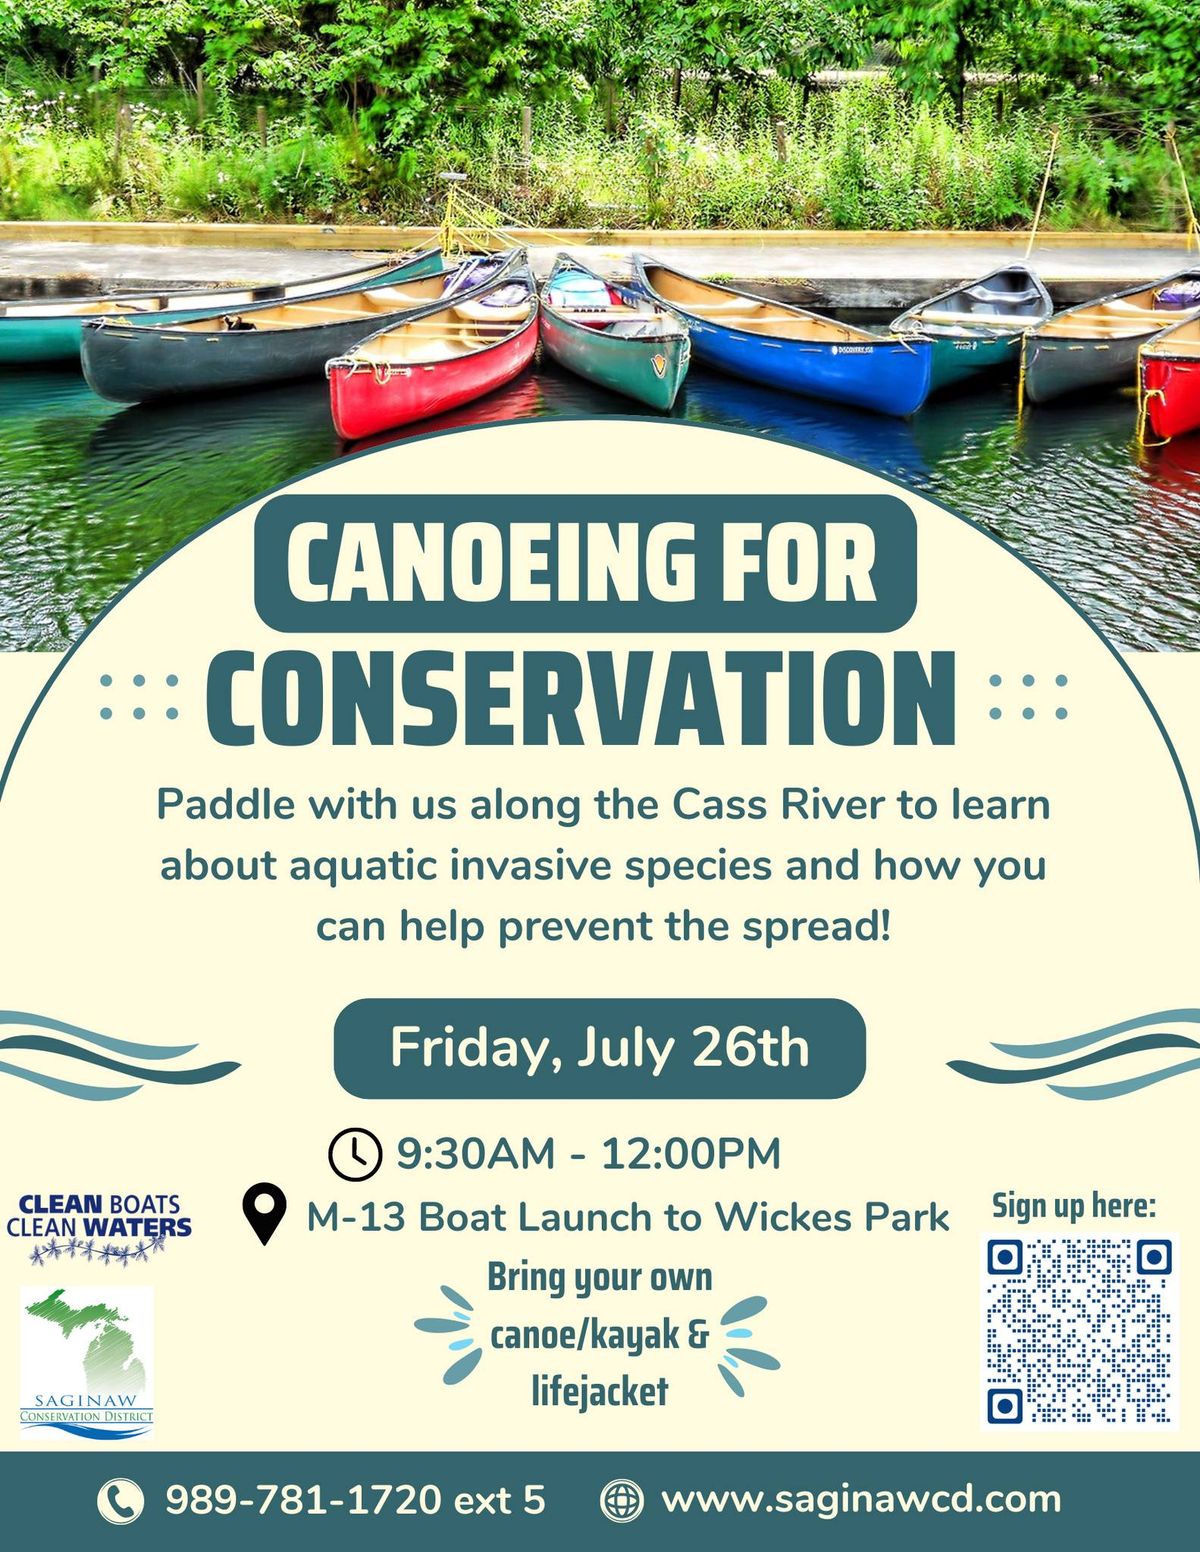 Canoeing for Conservation